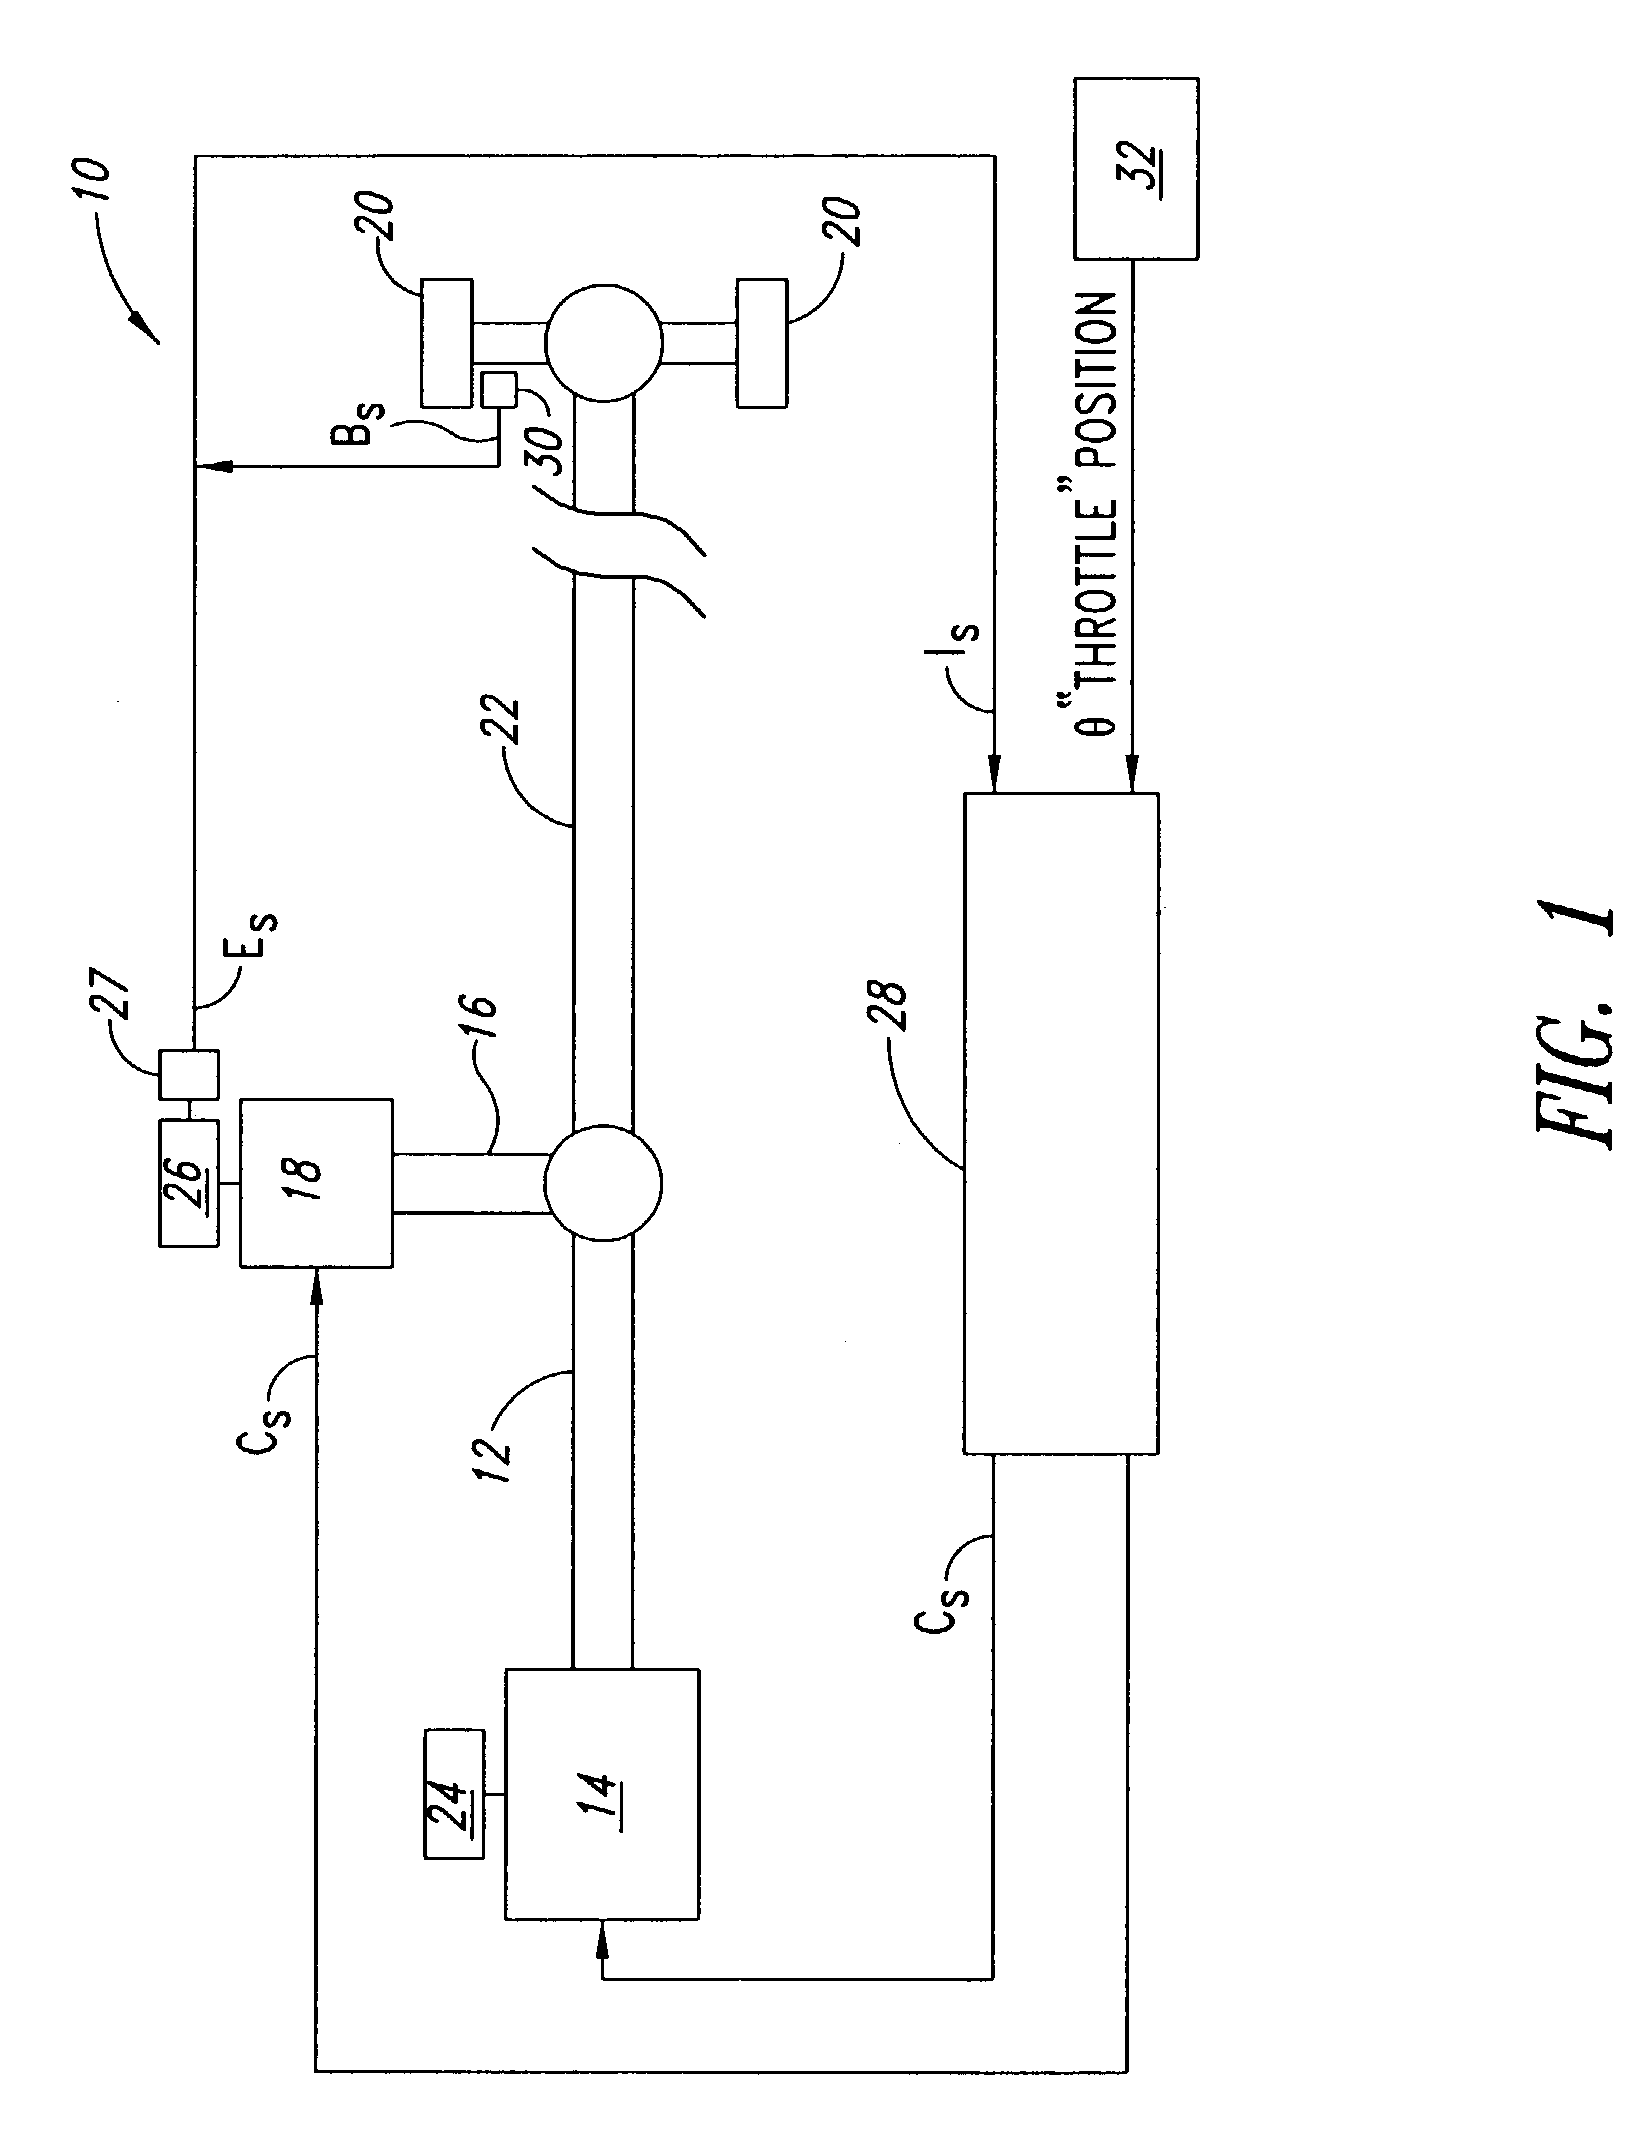 Methods of operating a parallel hybrid vehicle having an internal combustion engine and a secondary power source